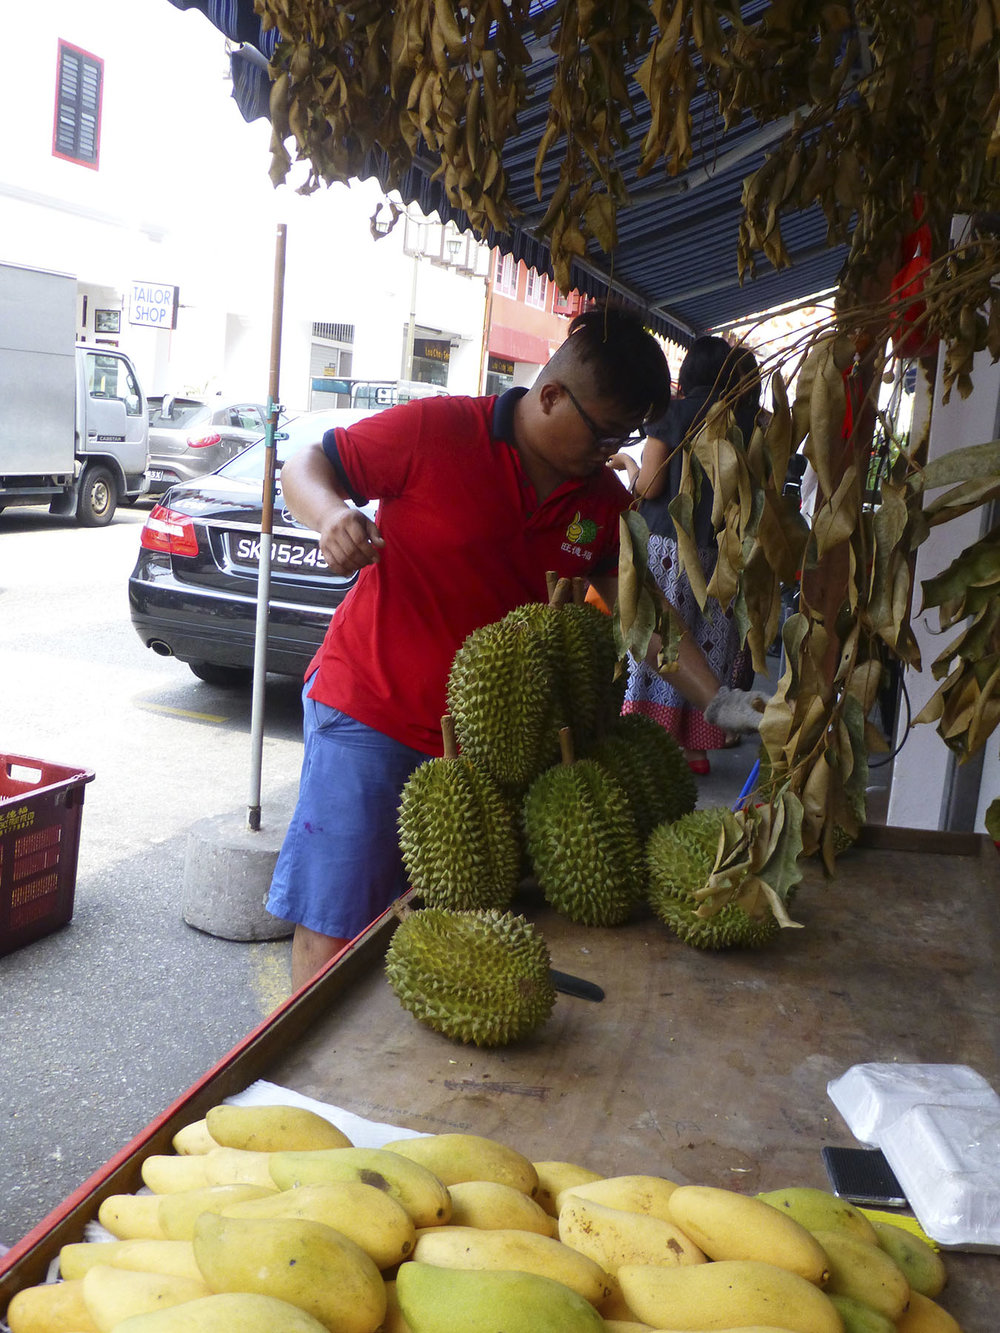 Durian For Sale